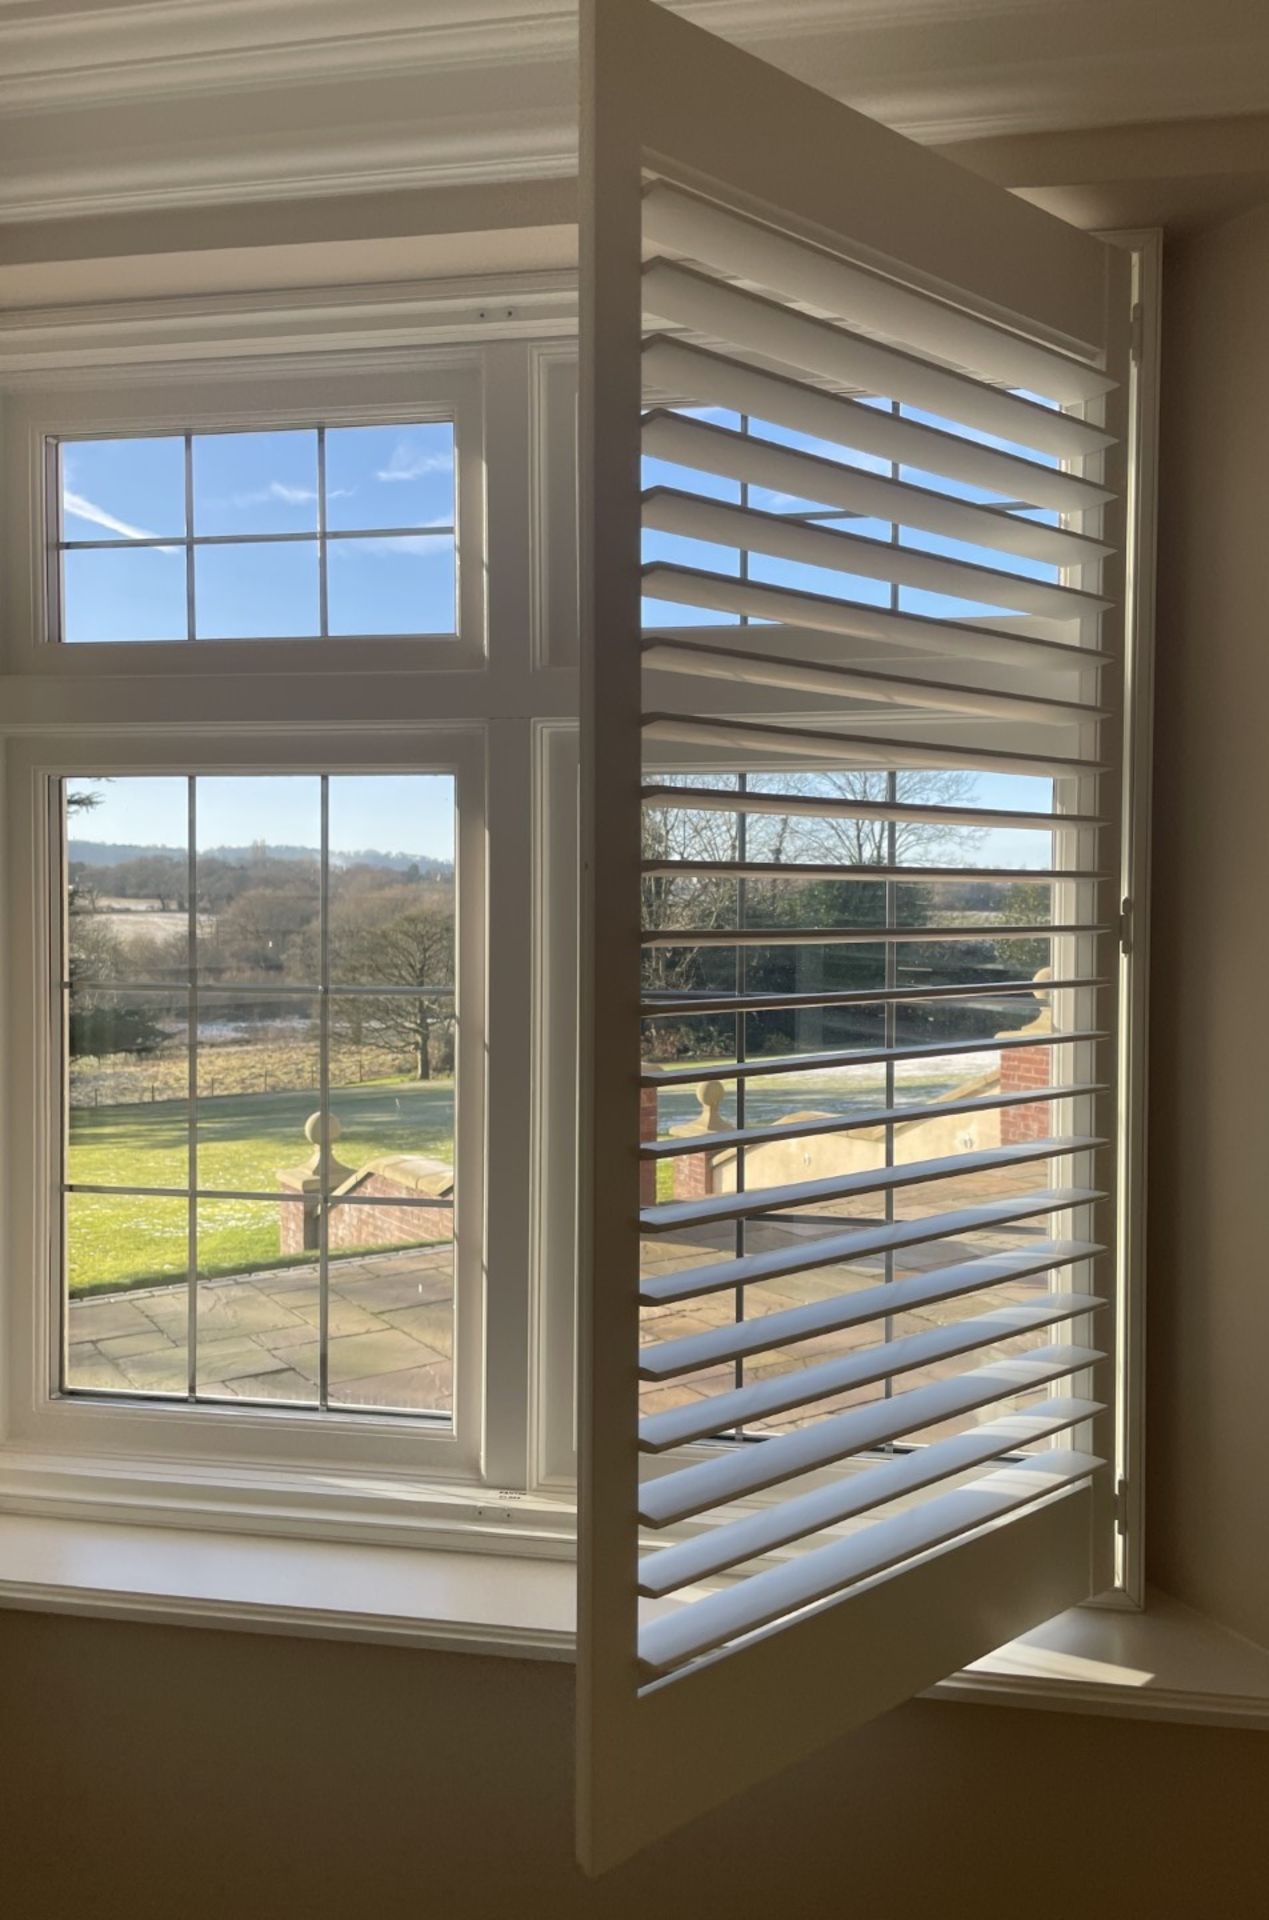 1 x Hardwood Timber Double Glazed Window Frames fitted with Shutter Blinds, In White - Ref: PAN104 - Image 3 of 12